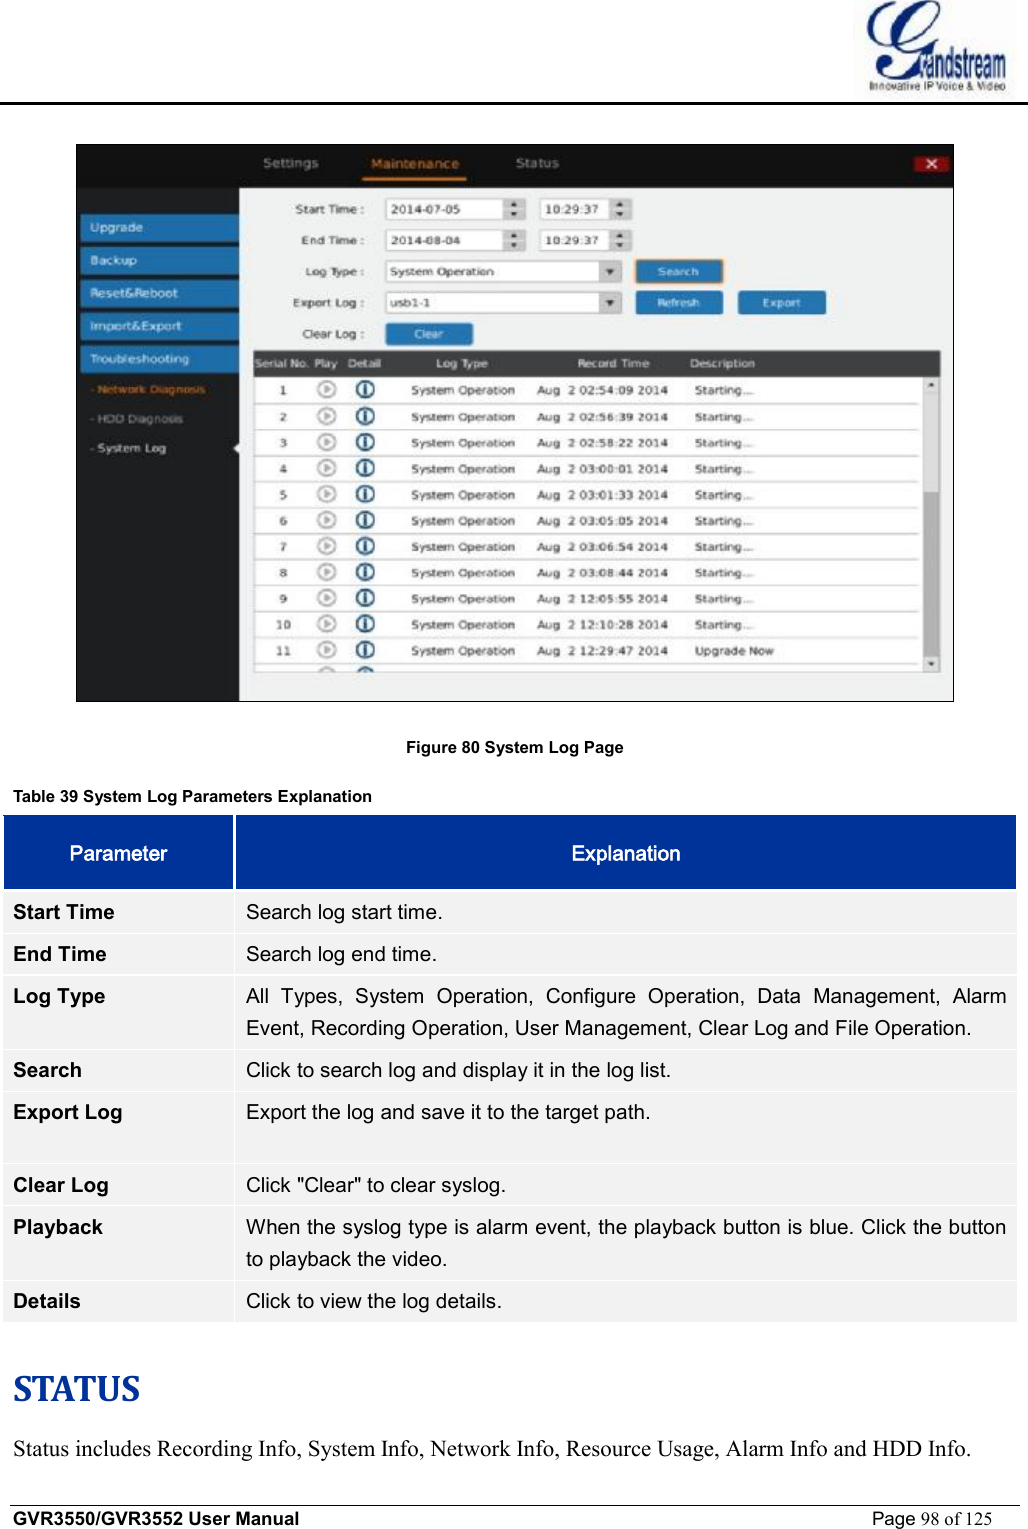    GVR3550/GVR3552 User Manual                                                             Page 98 of 125         Figure 80 System Log Page Table 39 System Log Parameters Explanation Parameter  Explanation Start Time  Search log start time. End Time  Search log end time. Log Type  All Types, System Operation, Configure Operation, Data Management, Alarm Event, Recording Operation, User Management, Clear Log and File Operation. Search  Click to search log and display it in the log list. Export Log  Export the log and save it to the target path. Clear Log  Click &quot;Clear&quot; to clear syslog. Playback  When the syslog type is alarm event, the playback button is blue. Click the button to playback the video. Details  Click to view the log details.  STATUS Status includes Recording Info, System Info, Network Info, Resource Usage, Alarm Info and HDD Info. 